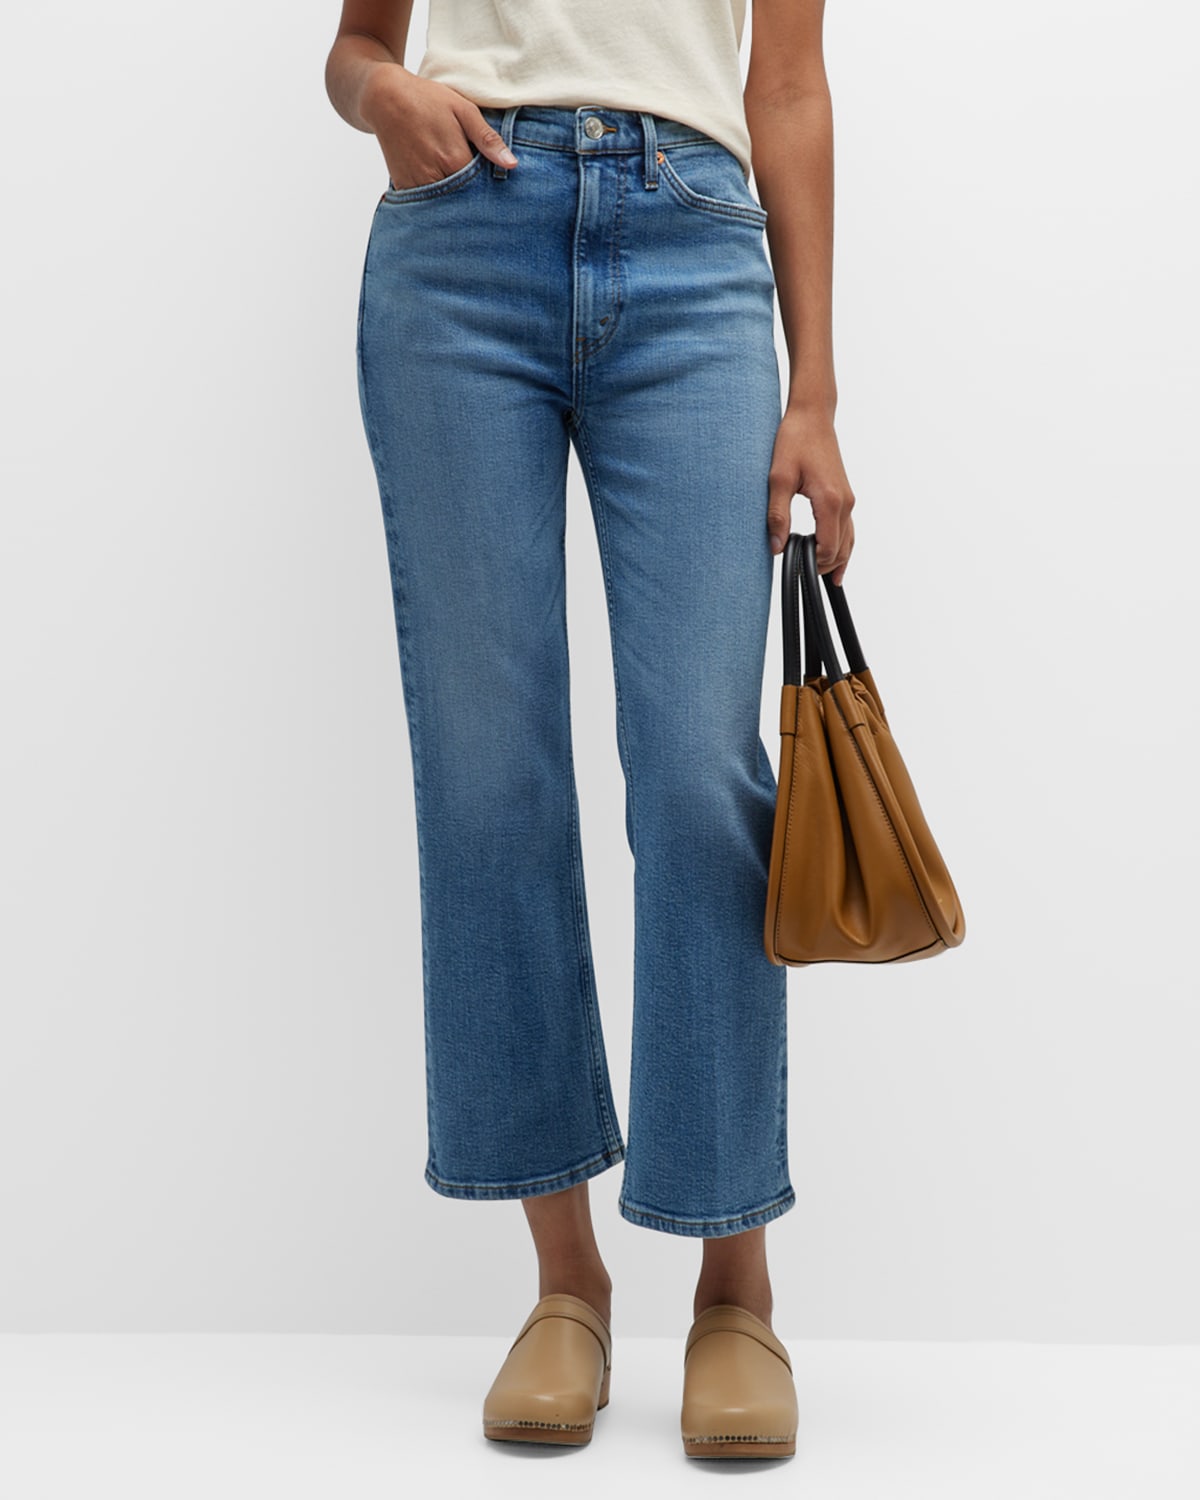 Re Sp 47 Sp Done High Sp 45 Sp Rise Jeans | Neiman Marcus